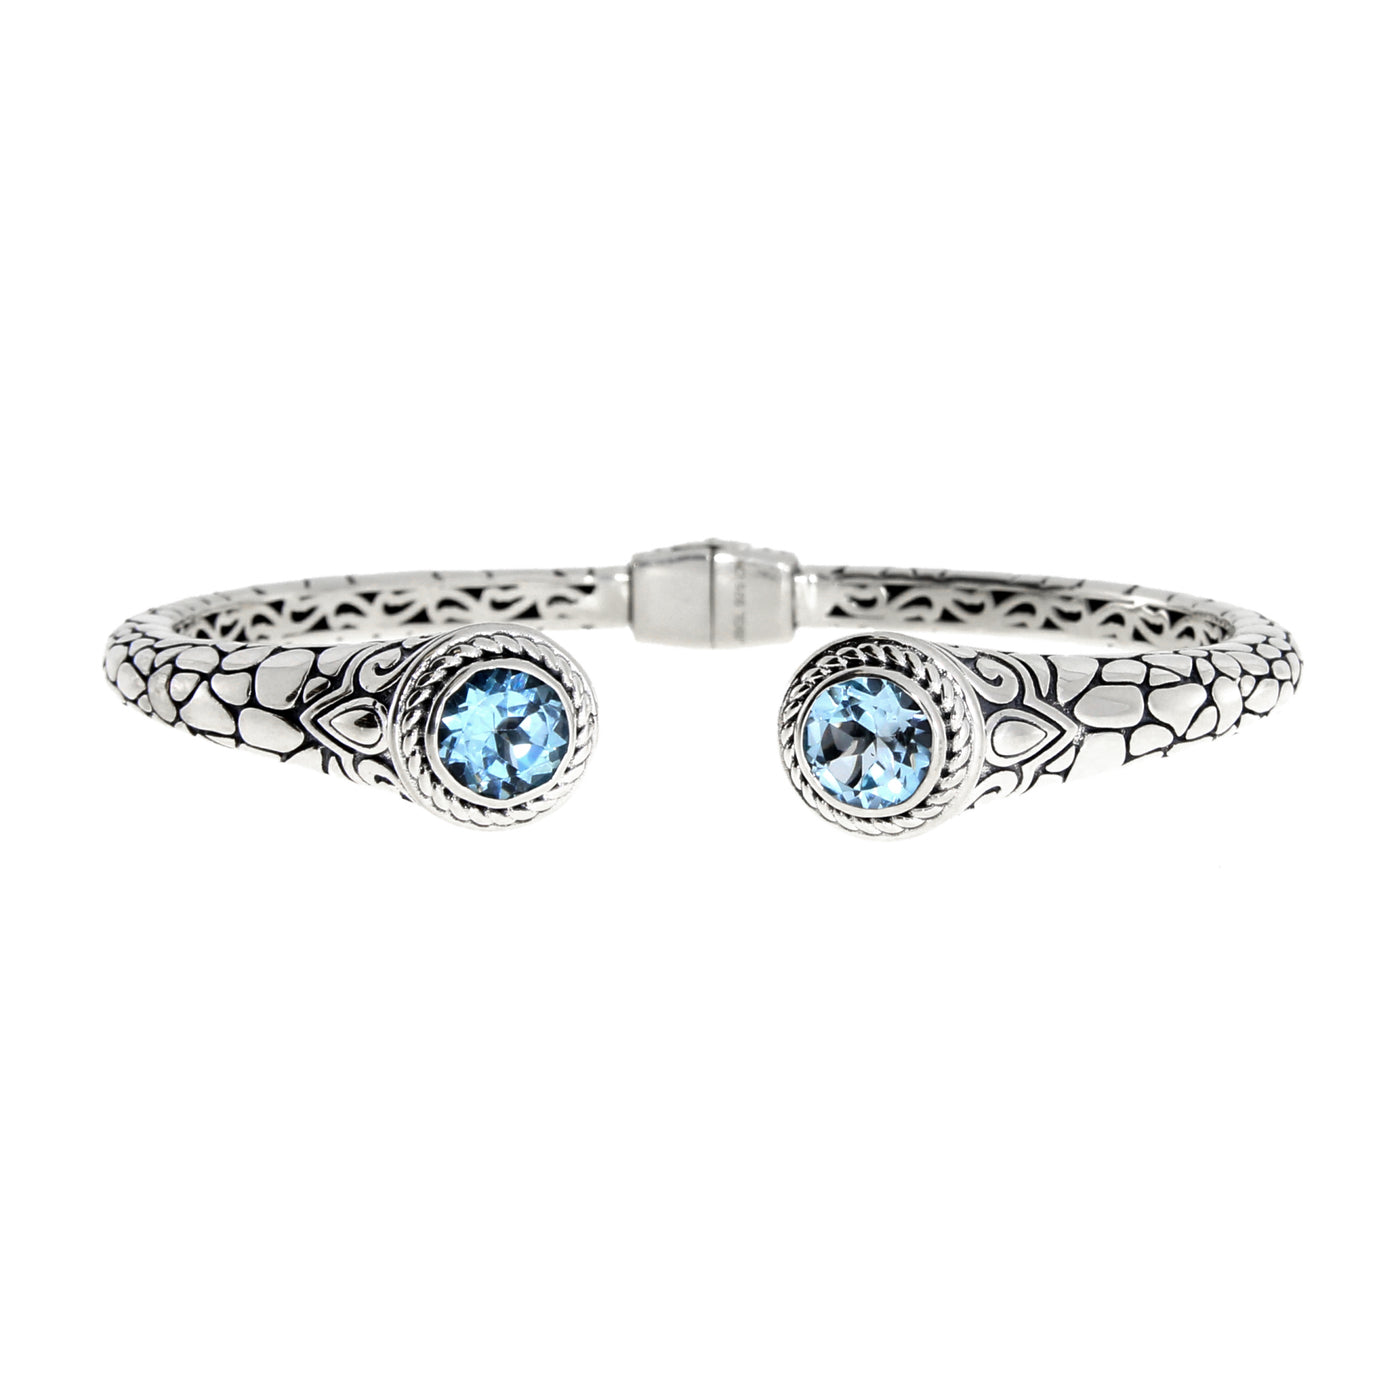 Blue Topaz Bali Rose And Stone Textured 925 Sterling Silver Vintage Cuff Bracelet